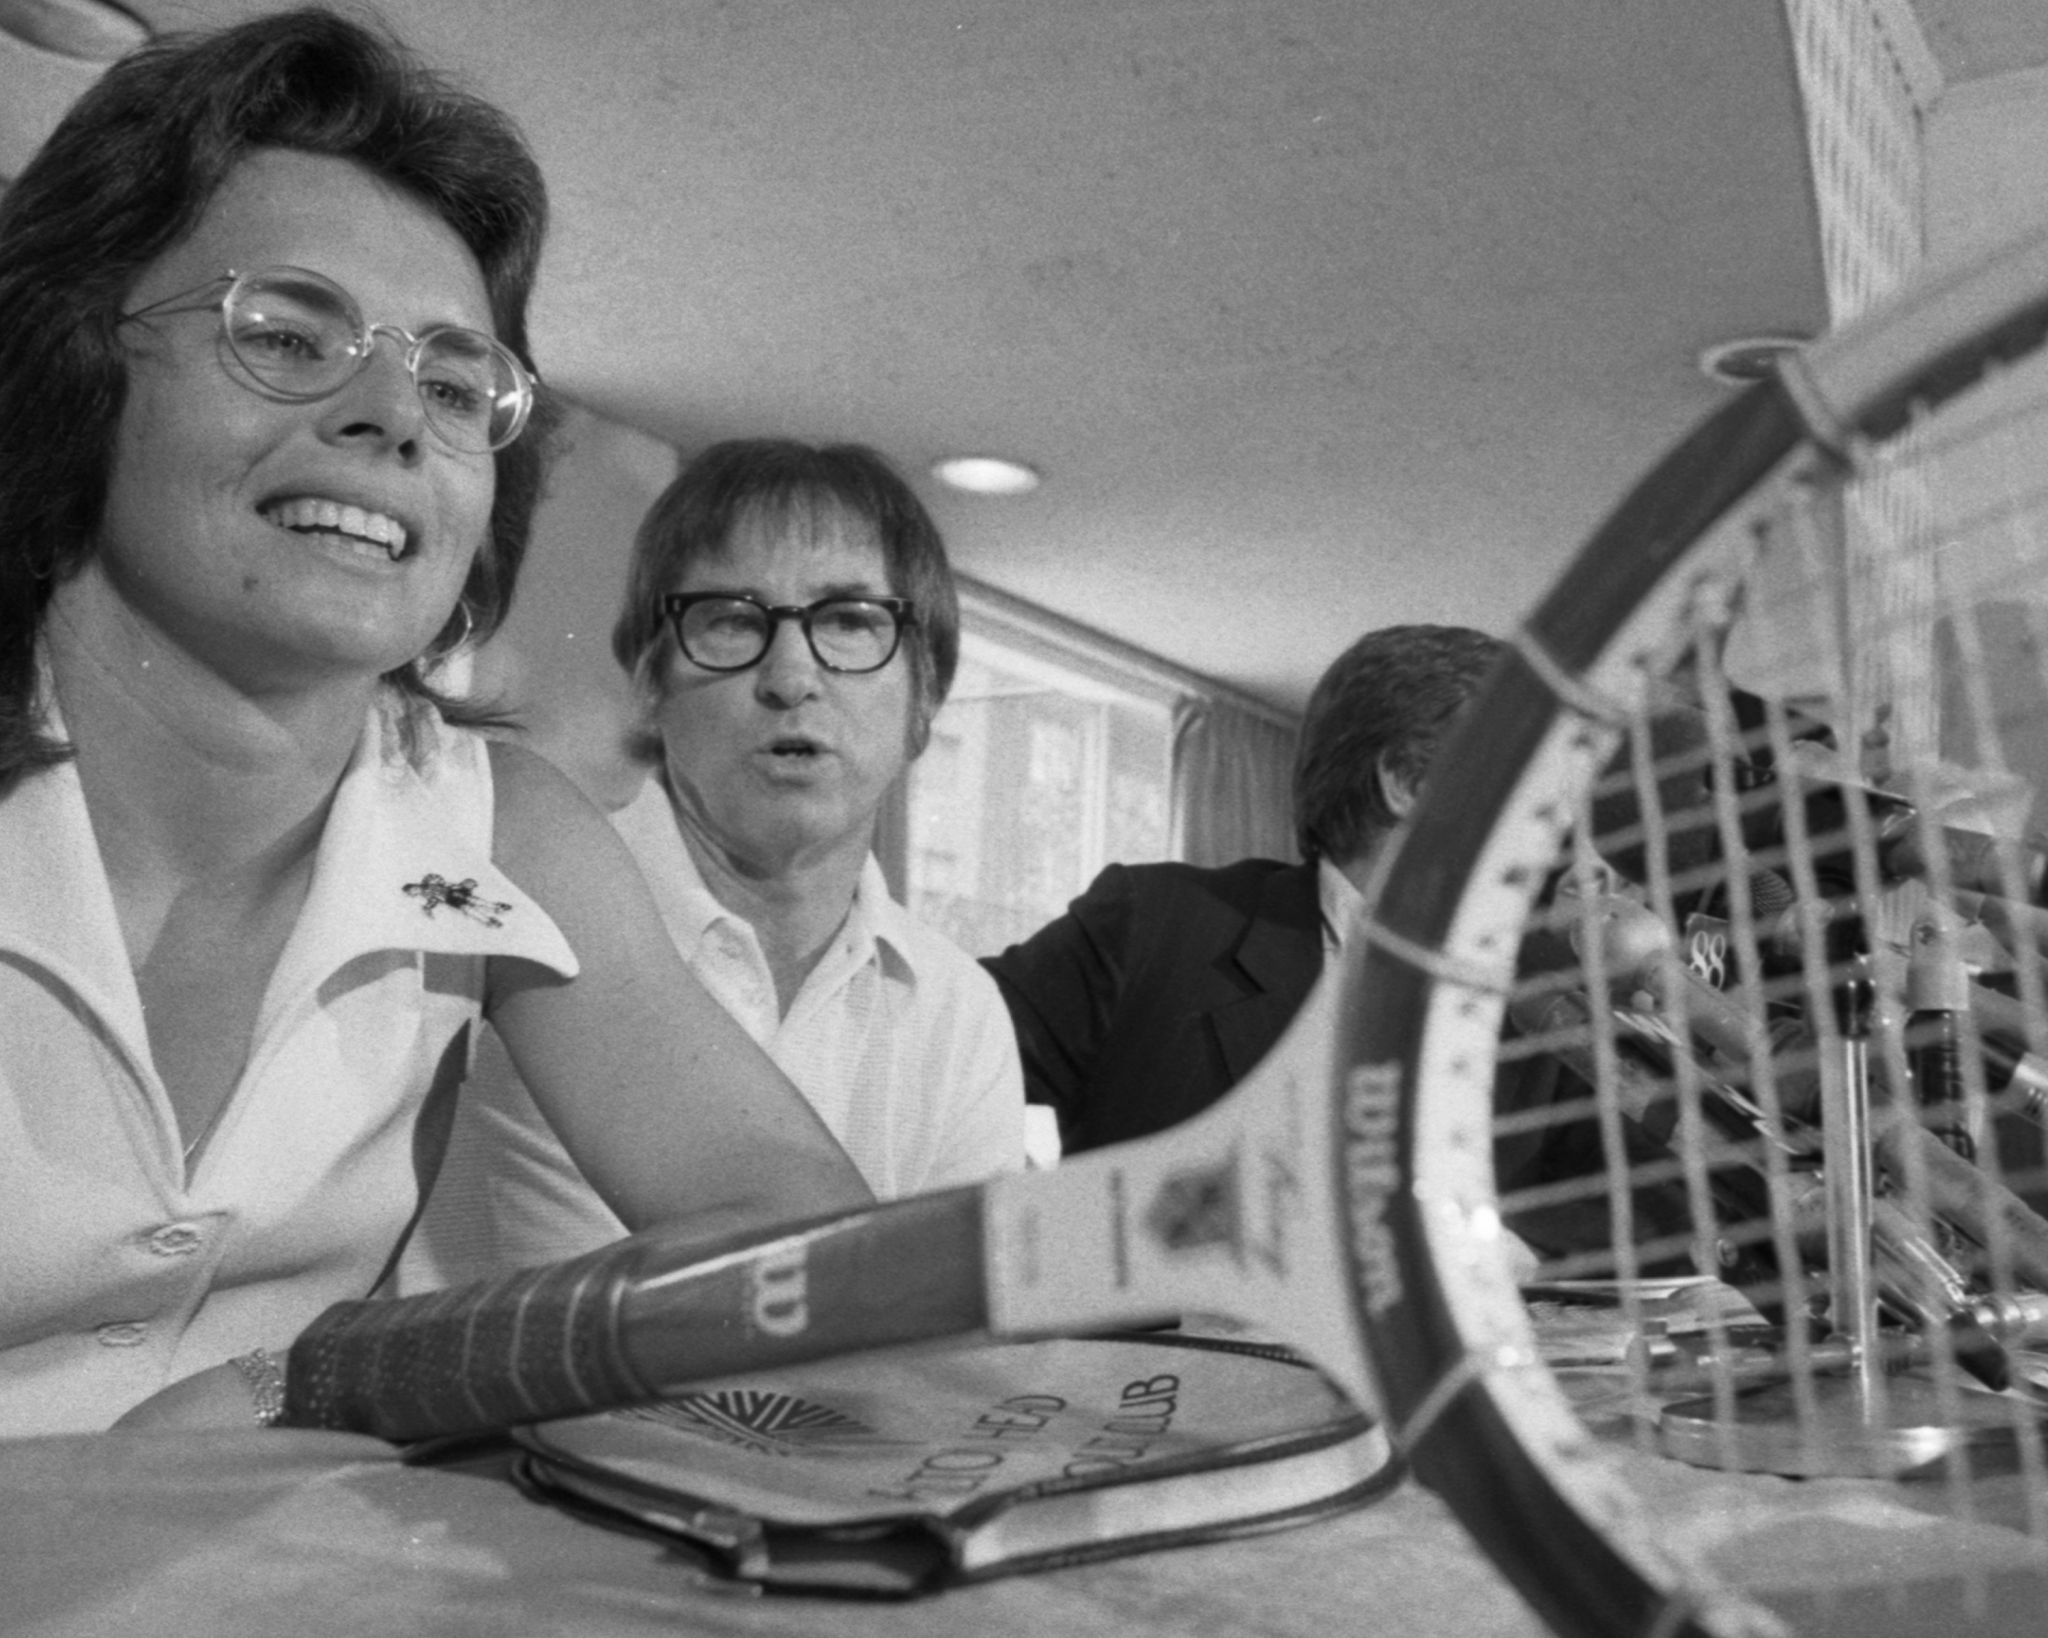 Battle of the Sexes cast: Real-life tennis players revealed